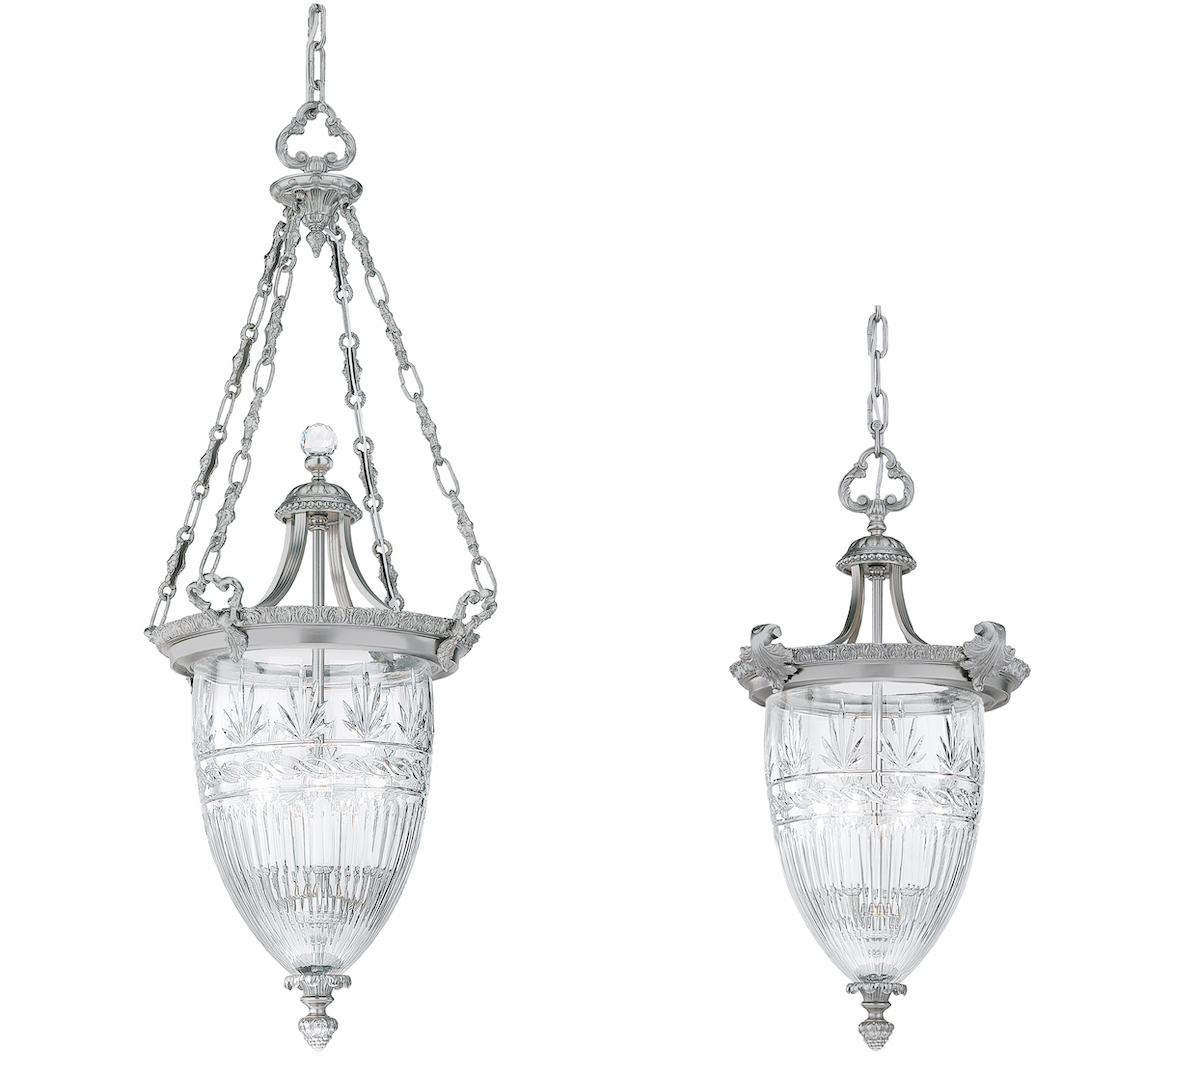 Product shot of the Victoria Collection chandelier